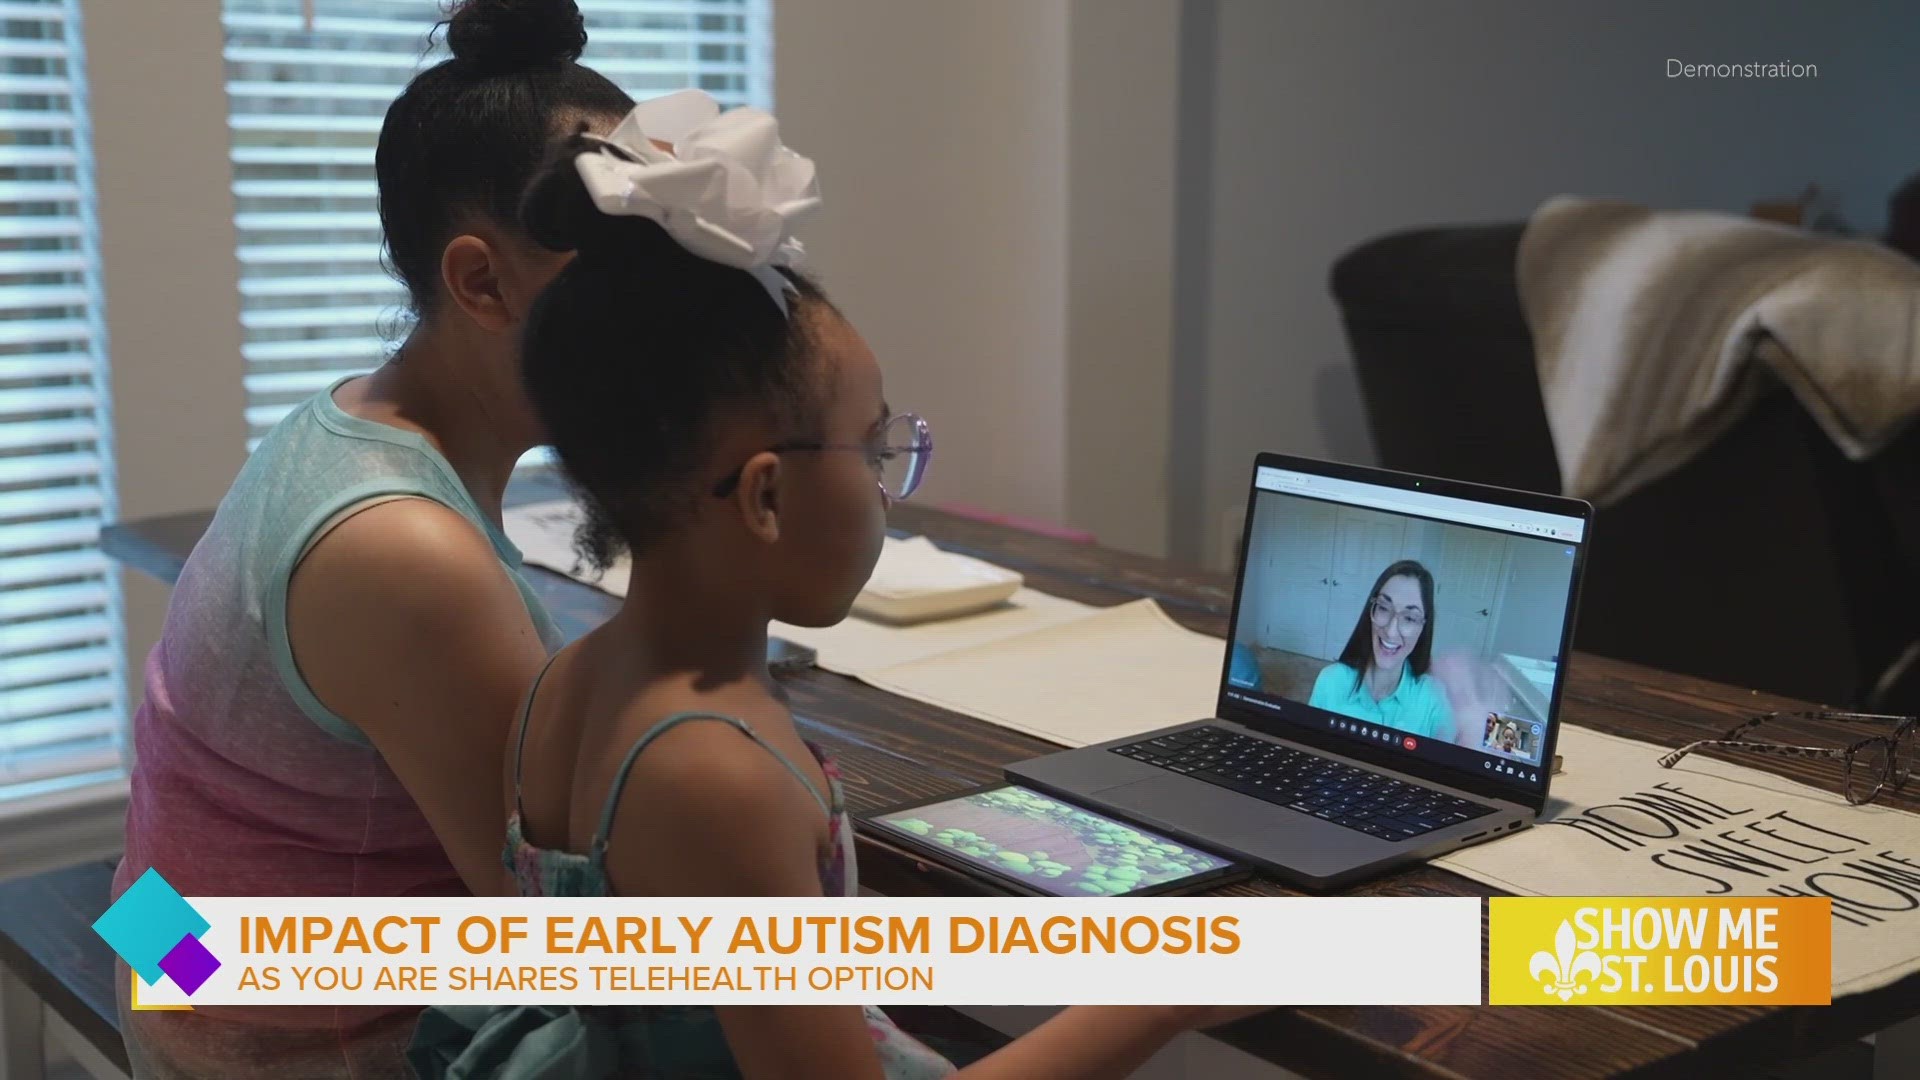 If you’re a parent having trouble finding an available autism diagnostic appointment for your child, this telehealth option could be the answer.